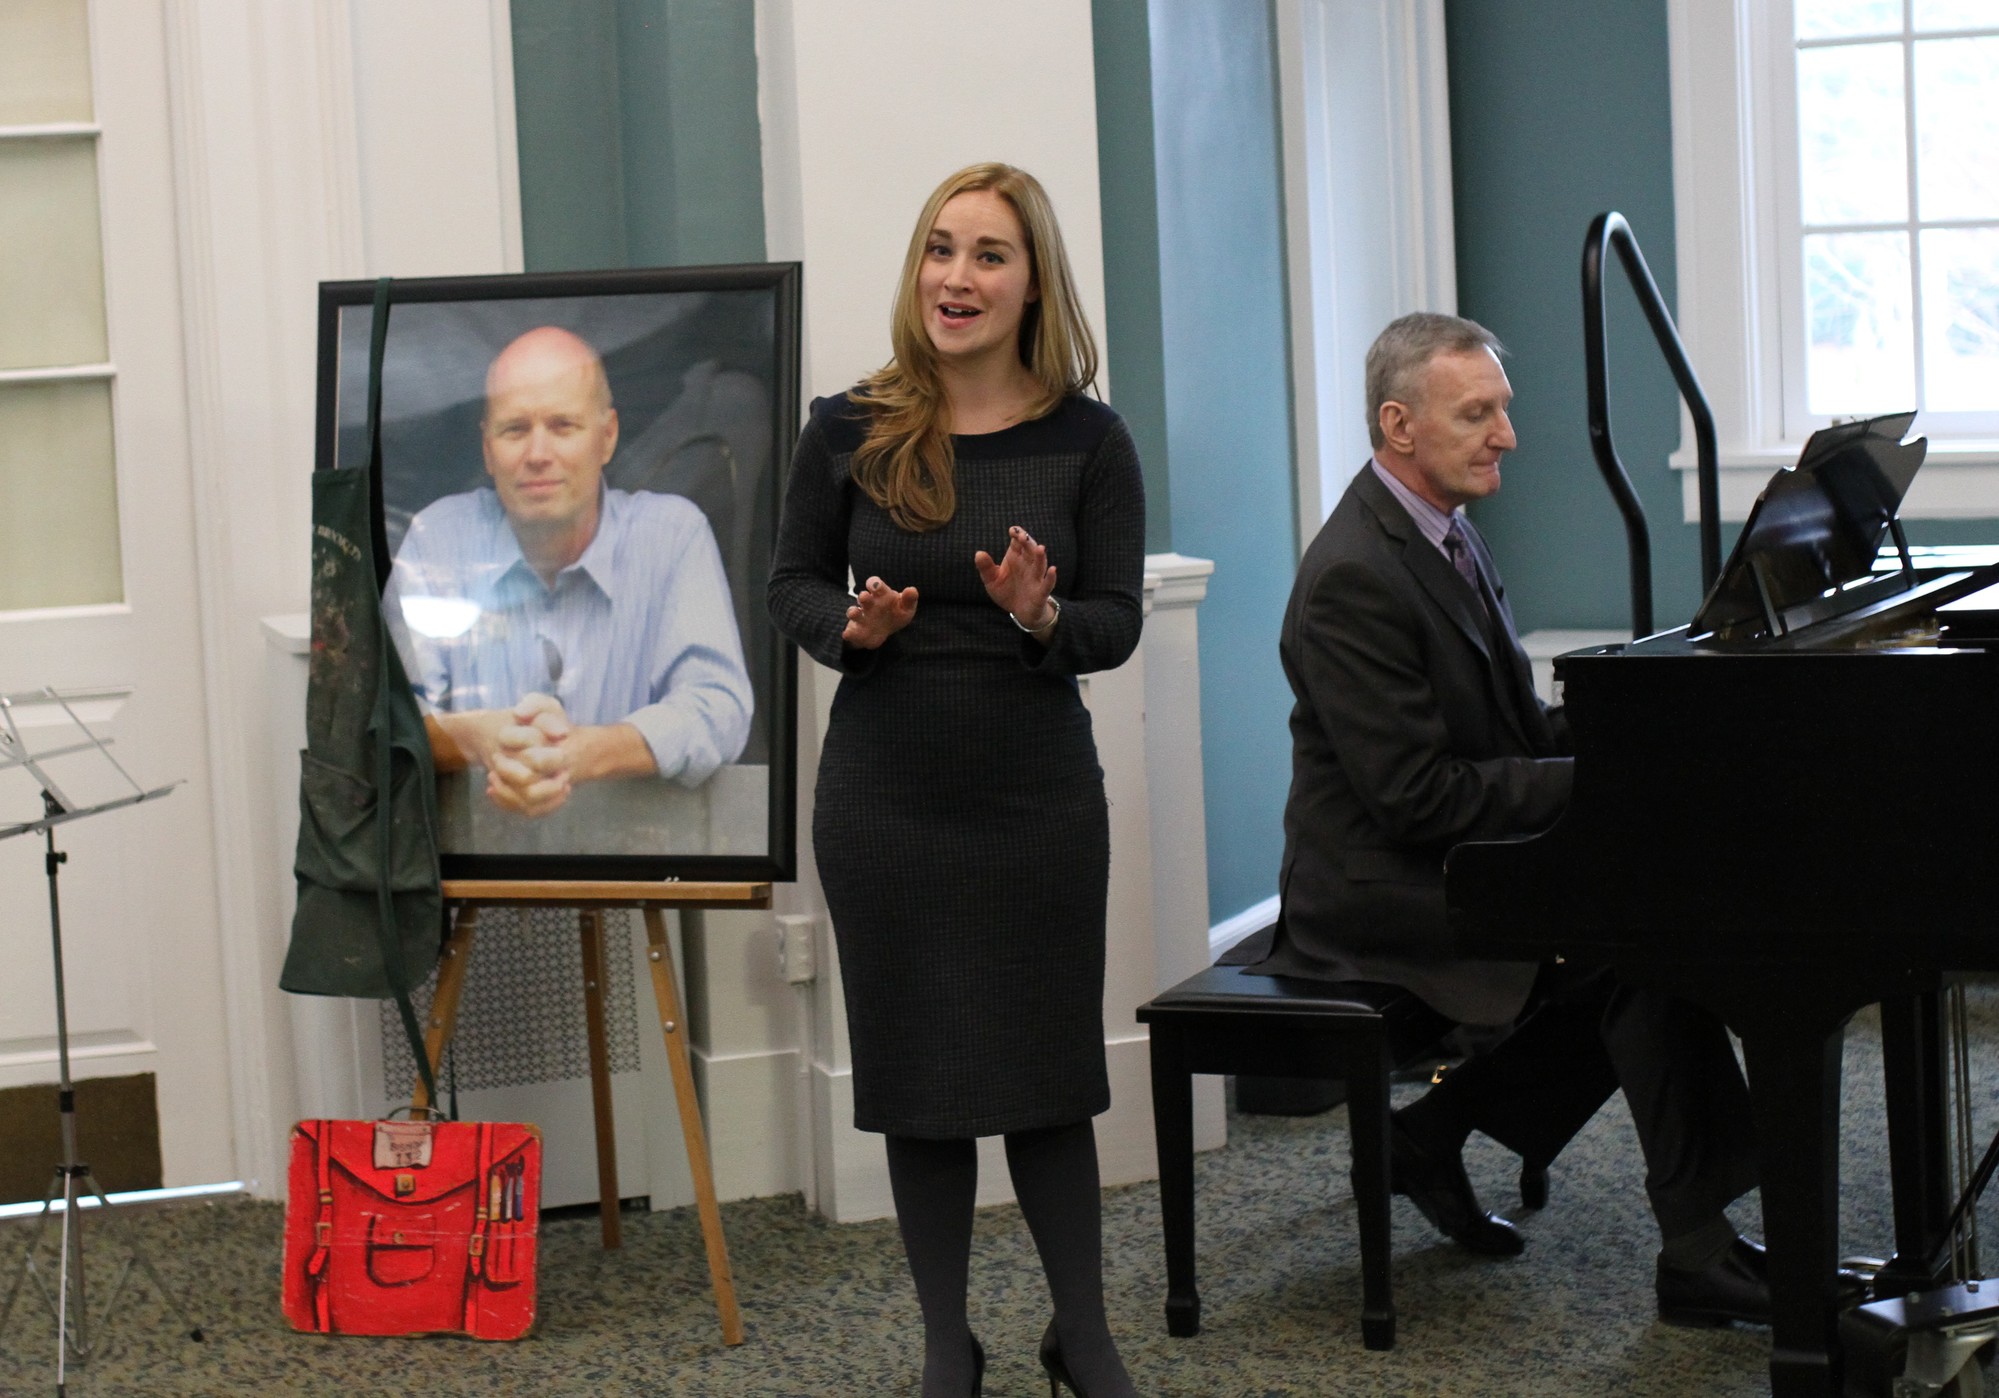 Jaime Hastings, an East Rockaway High School alumnus class of 202, who knew Bishop best through working with him in the school musicals, performed a song in Bishop's honor, "If" ("If a picture paints a thousand words...") by Bread.